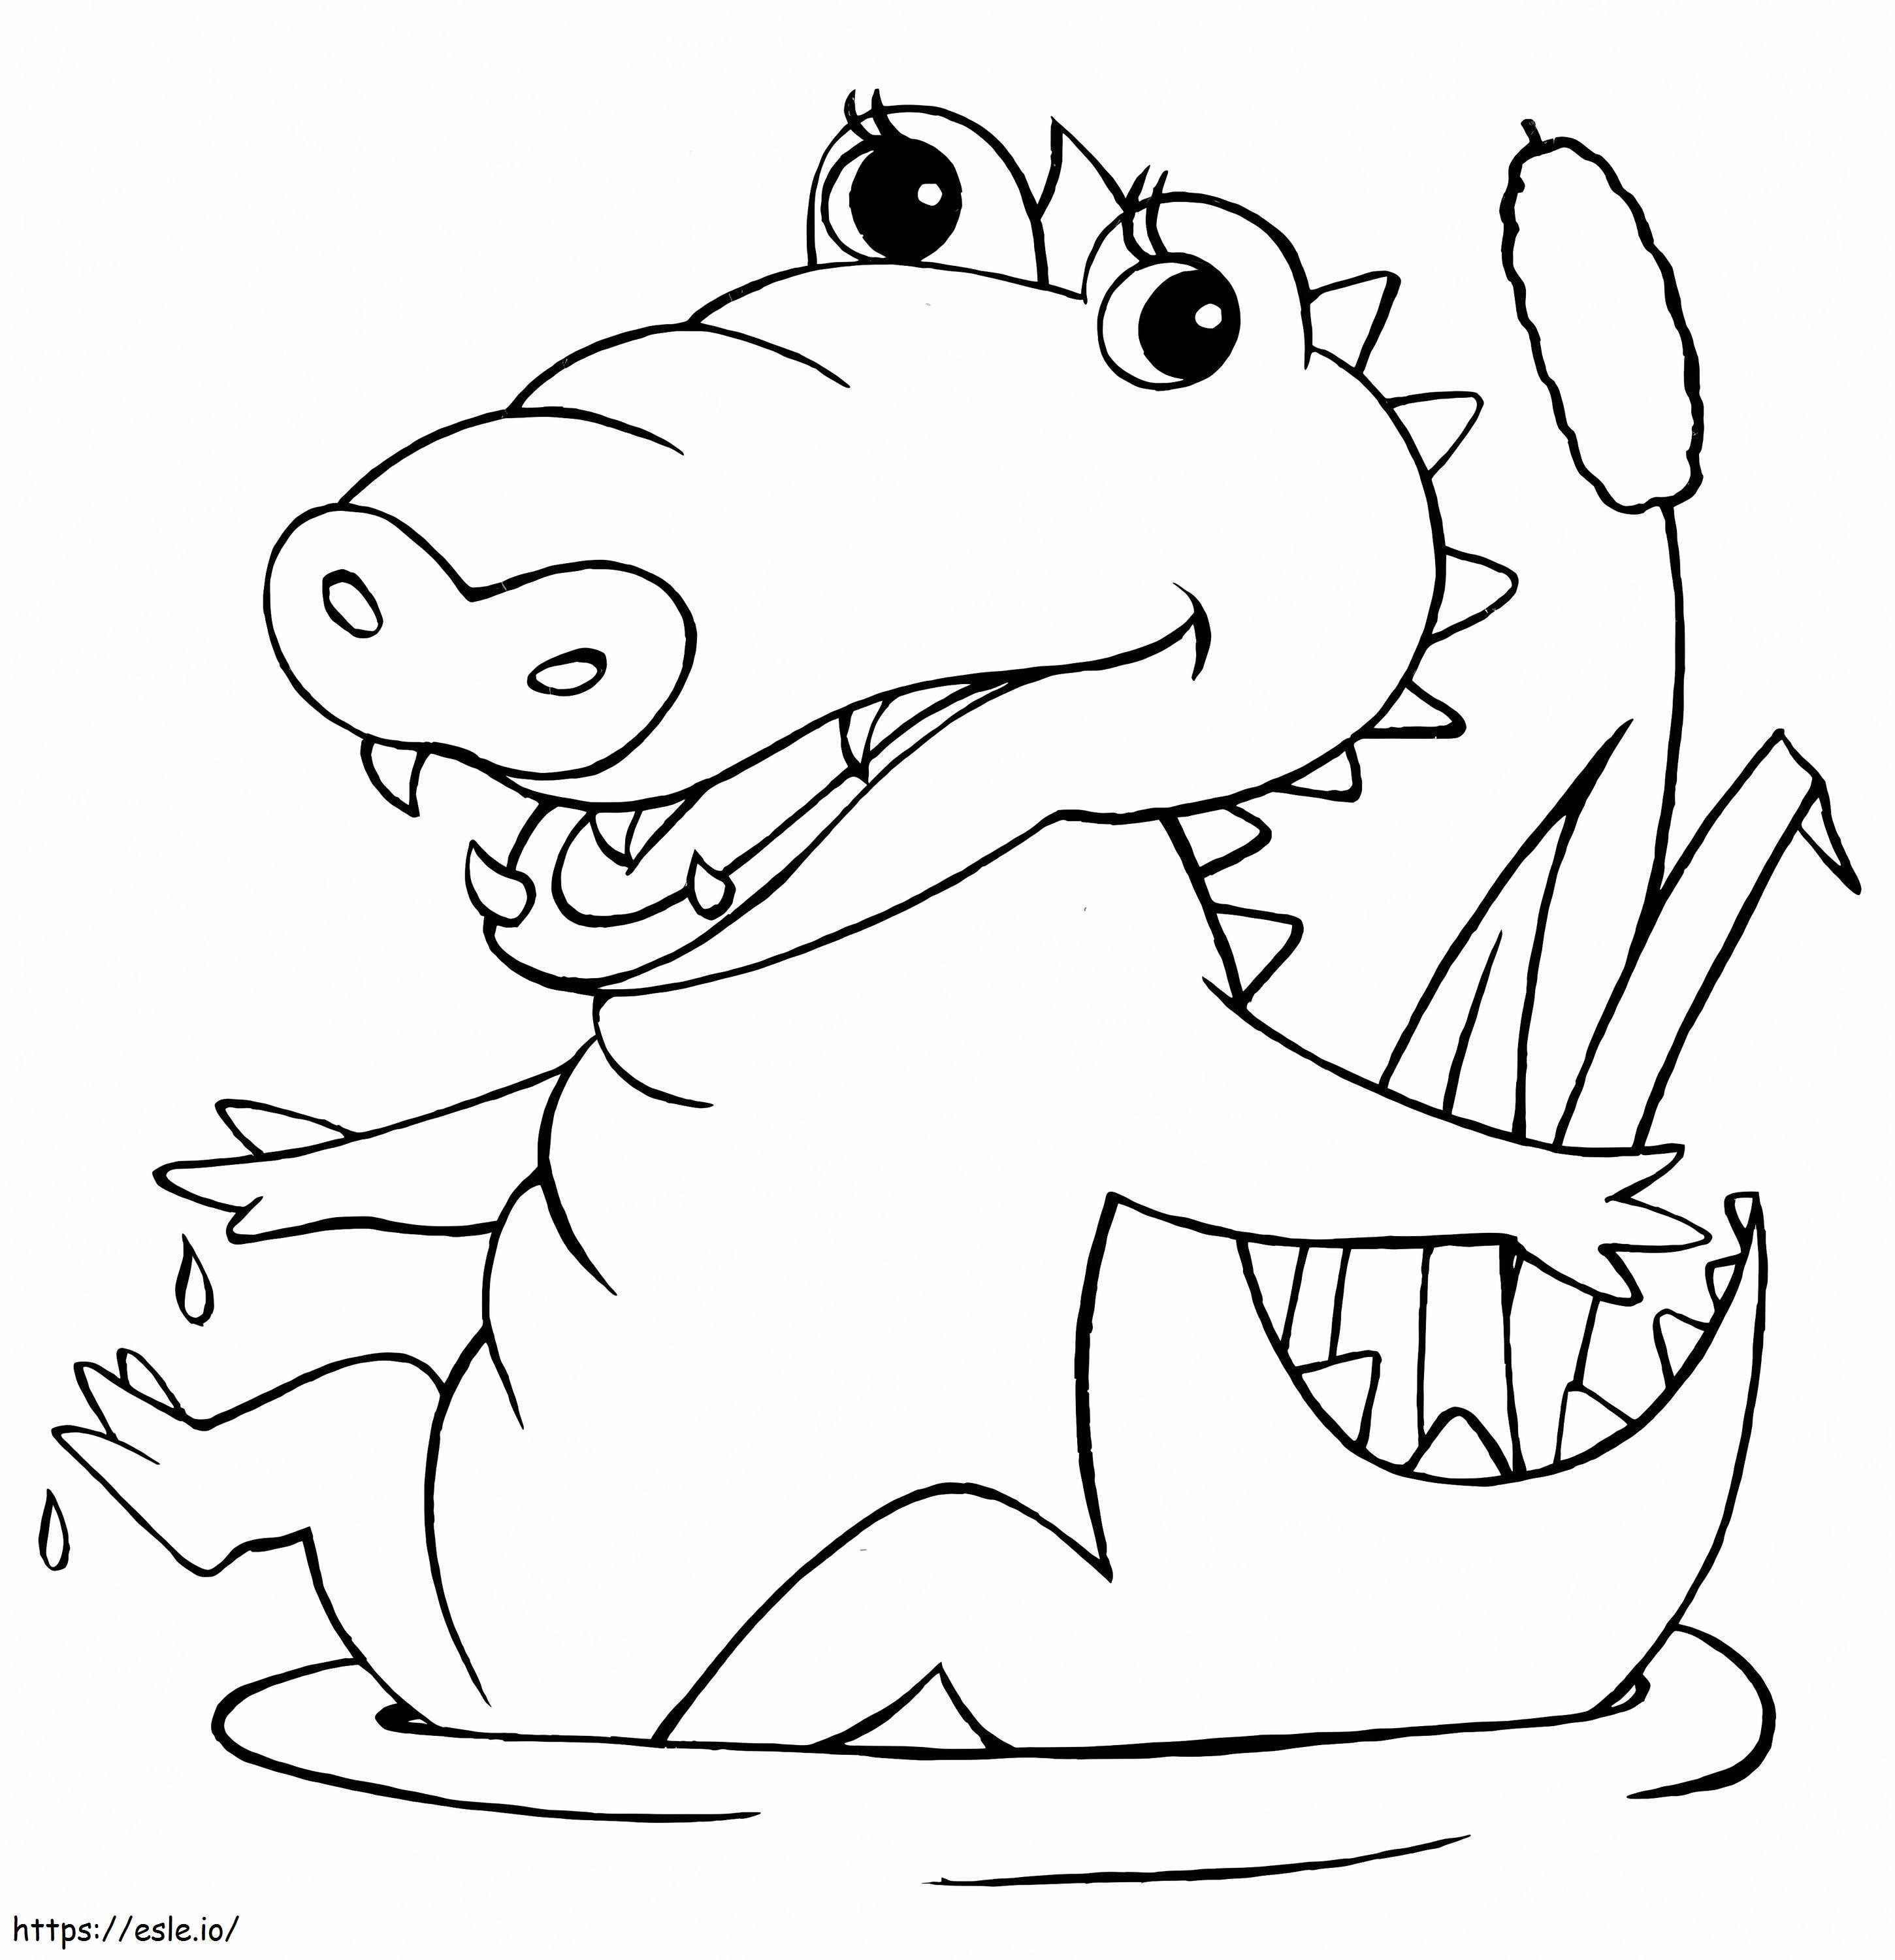 Crocodile Playing Under Water coloring page